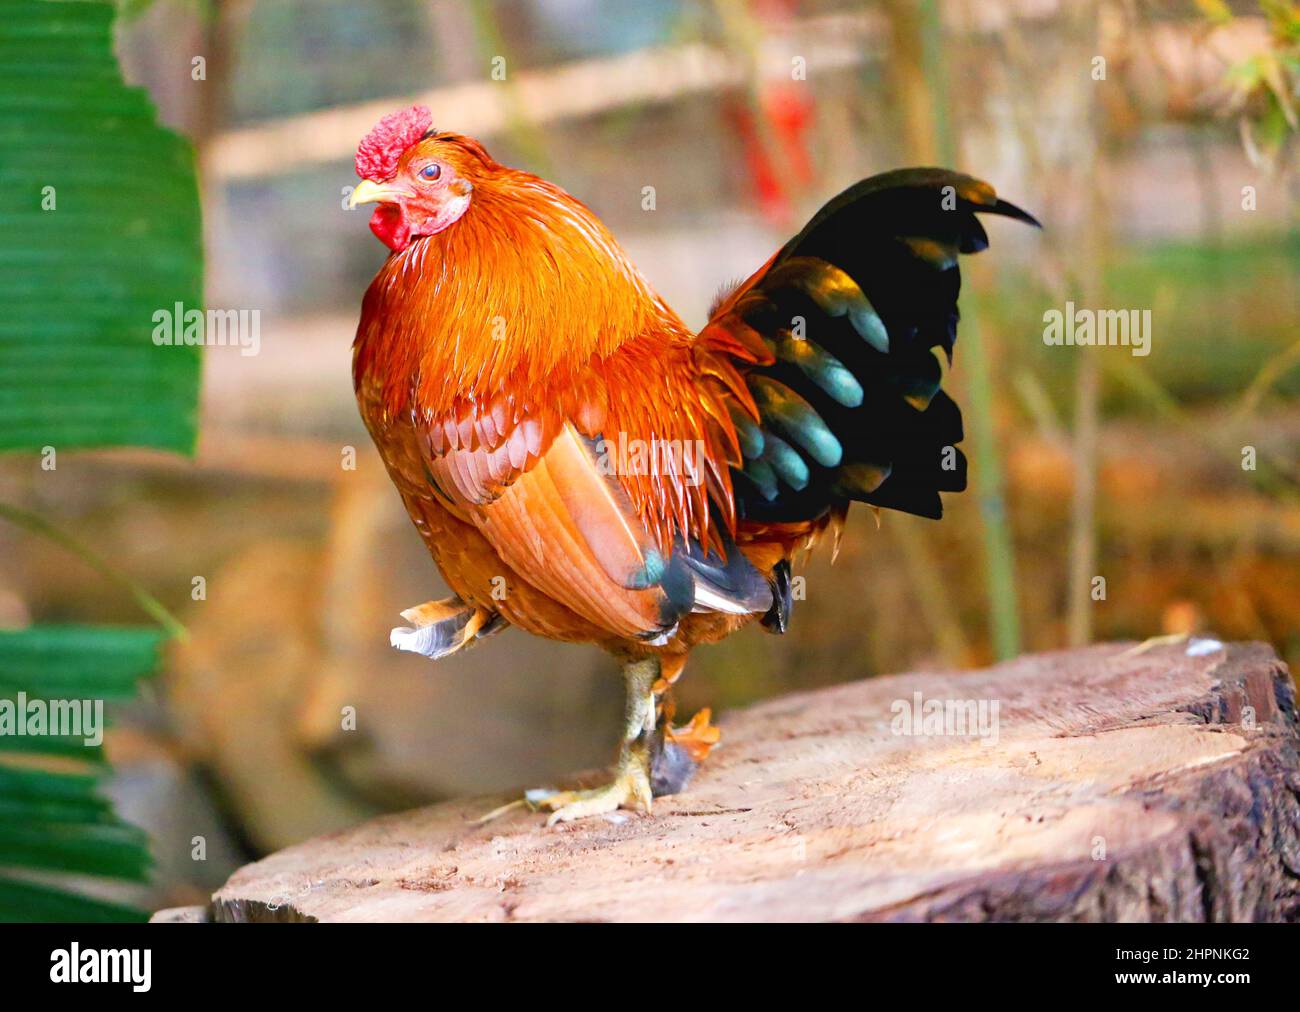 beautiful multicolored red rooster stands on a stump photographed in close-up Stock Photo